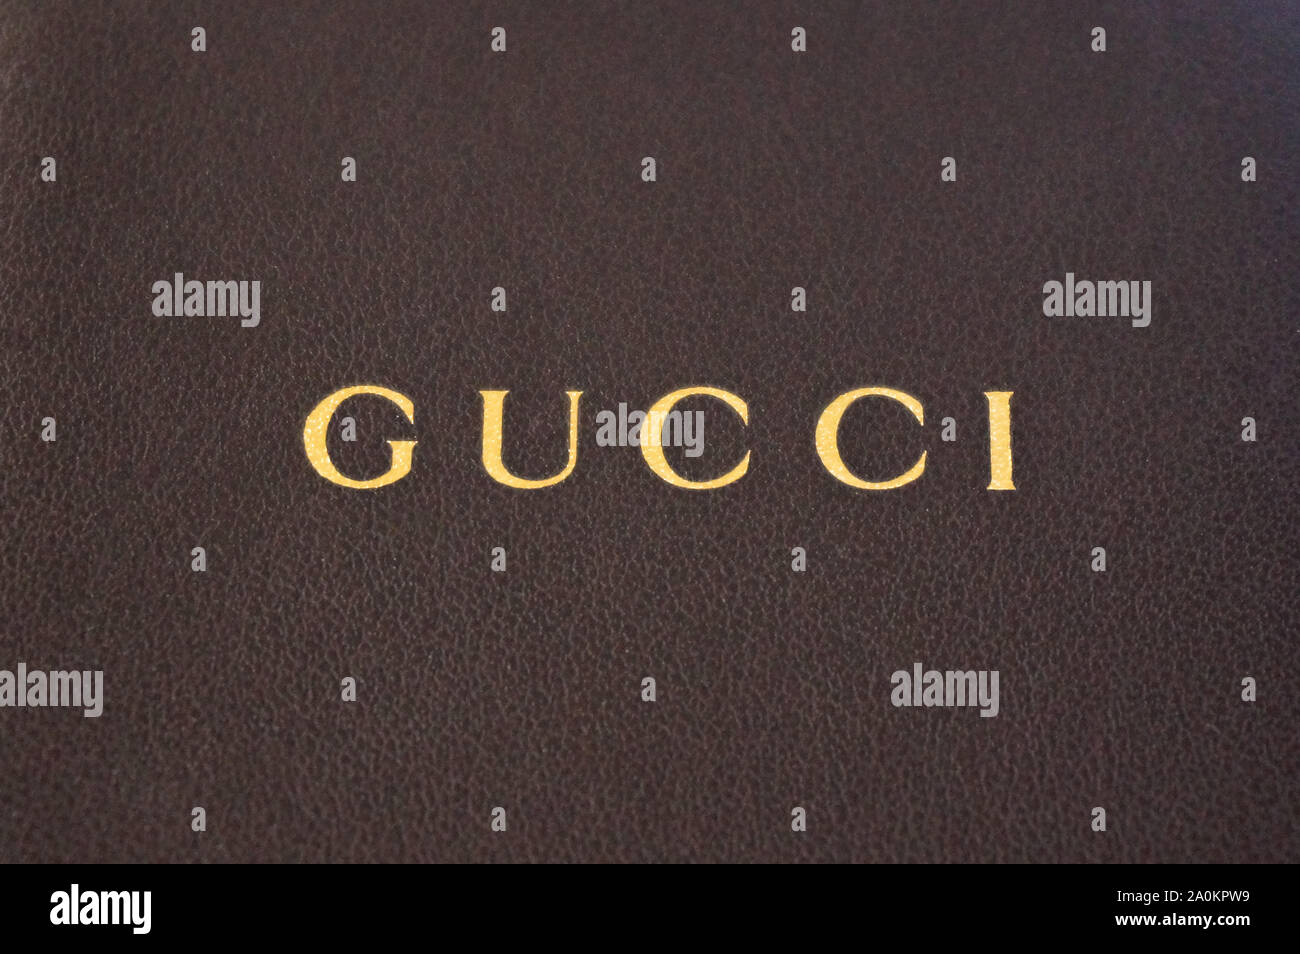 Gucci Logo High Resolution Stock Photography and Images - Alamy